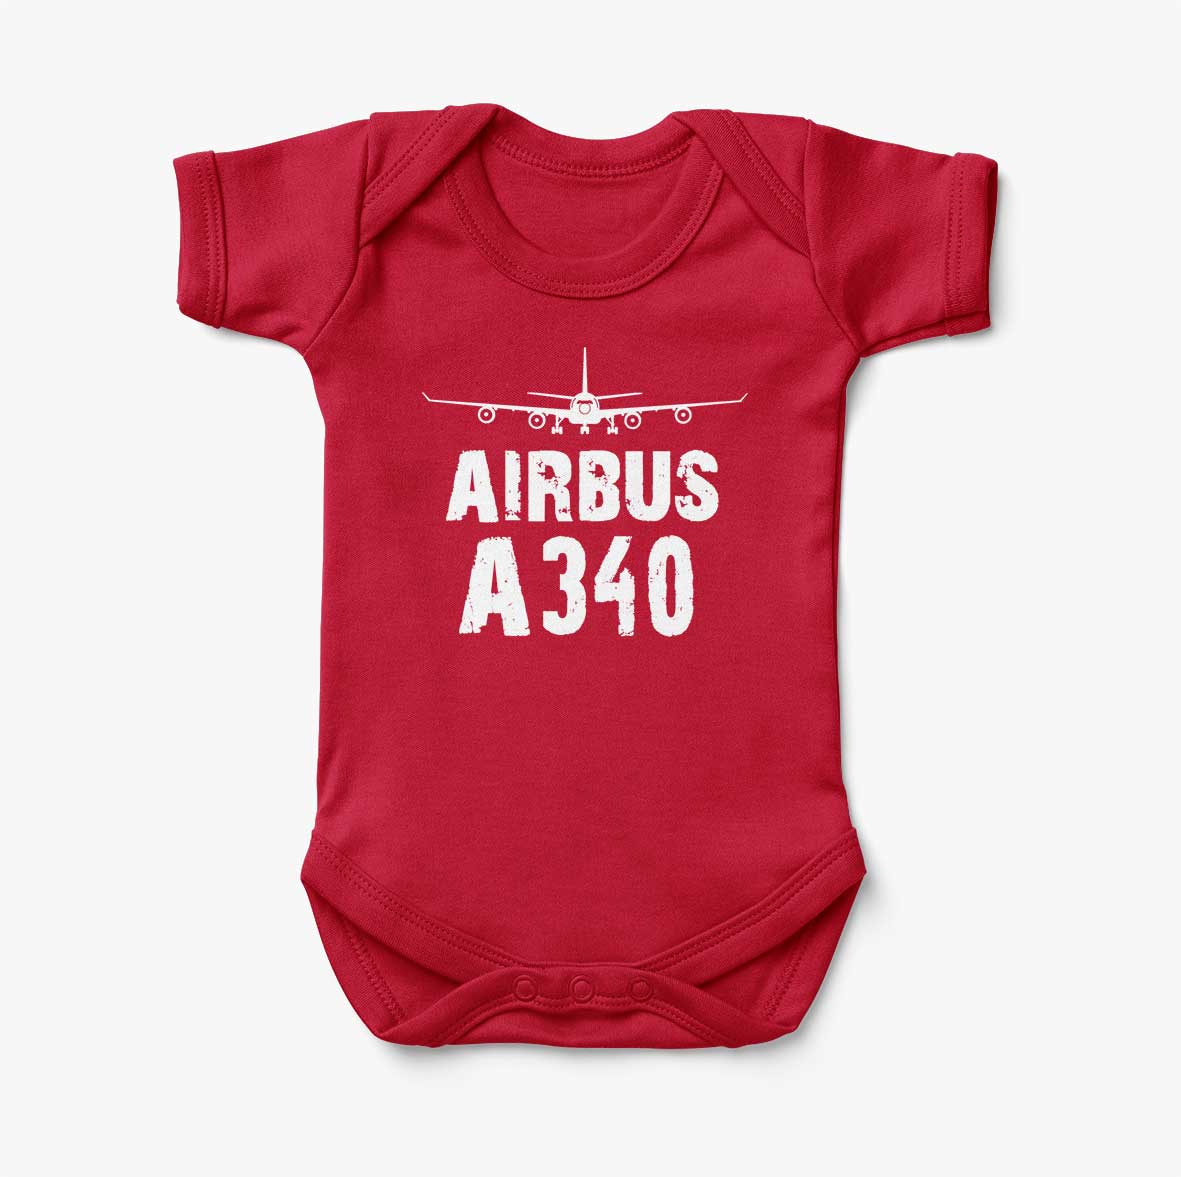 Airbus A340 & Plane Designed Baby Bodysuits